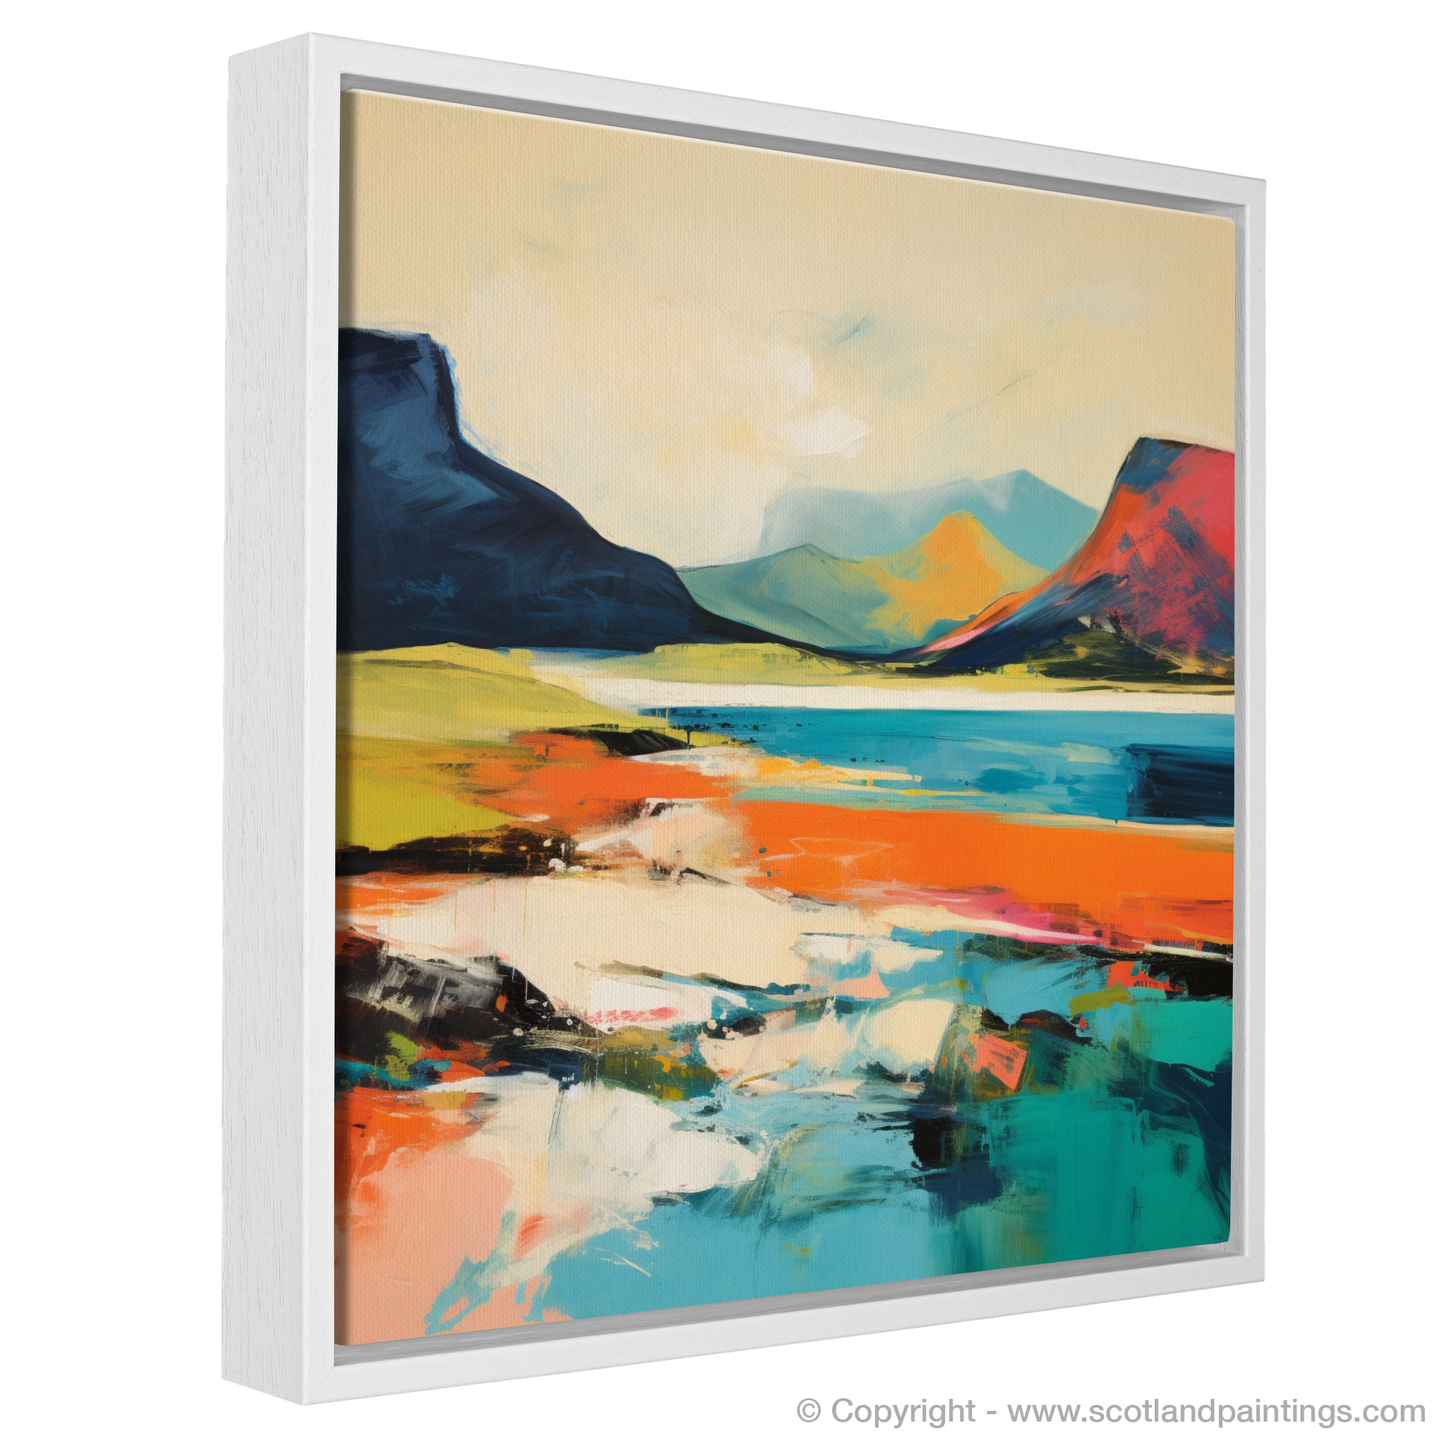 Coral Beach Dreamscape: An Abstract Ode to Skye's Coastline